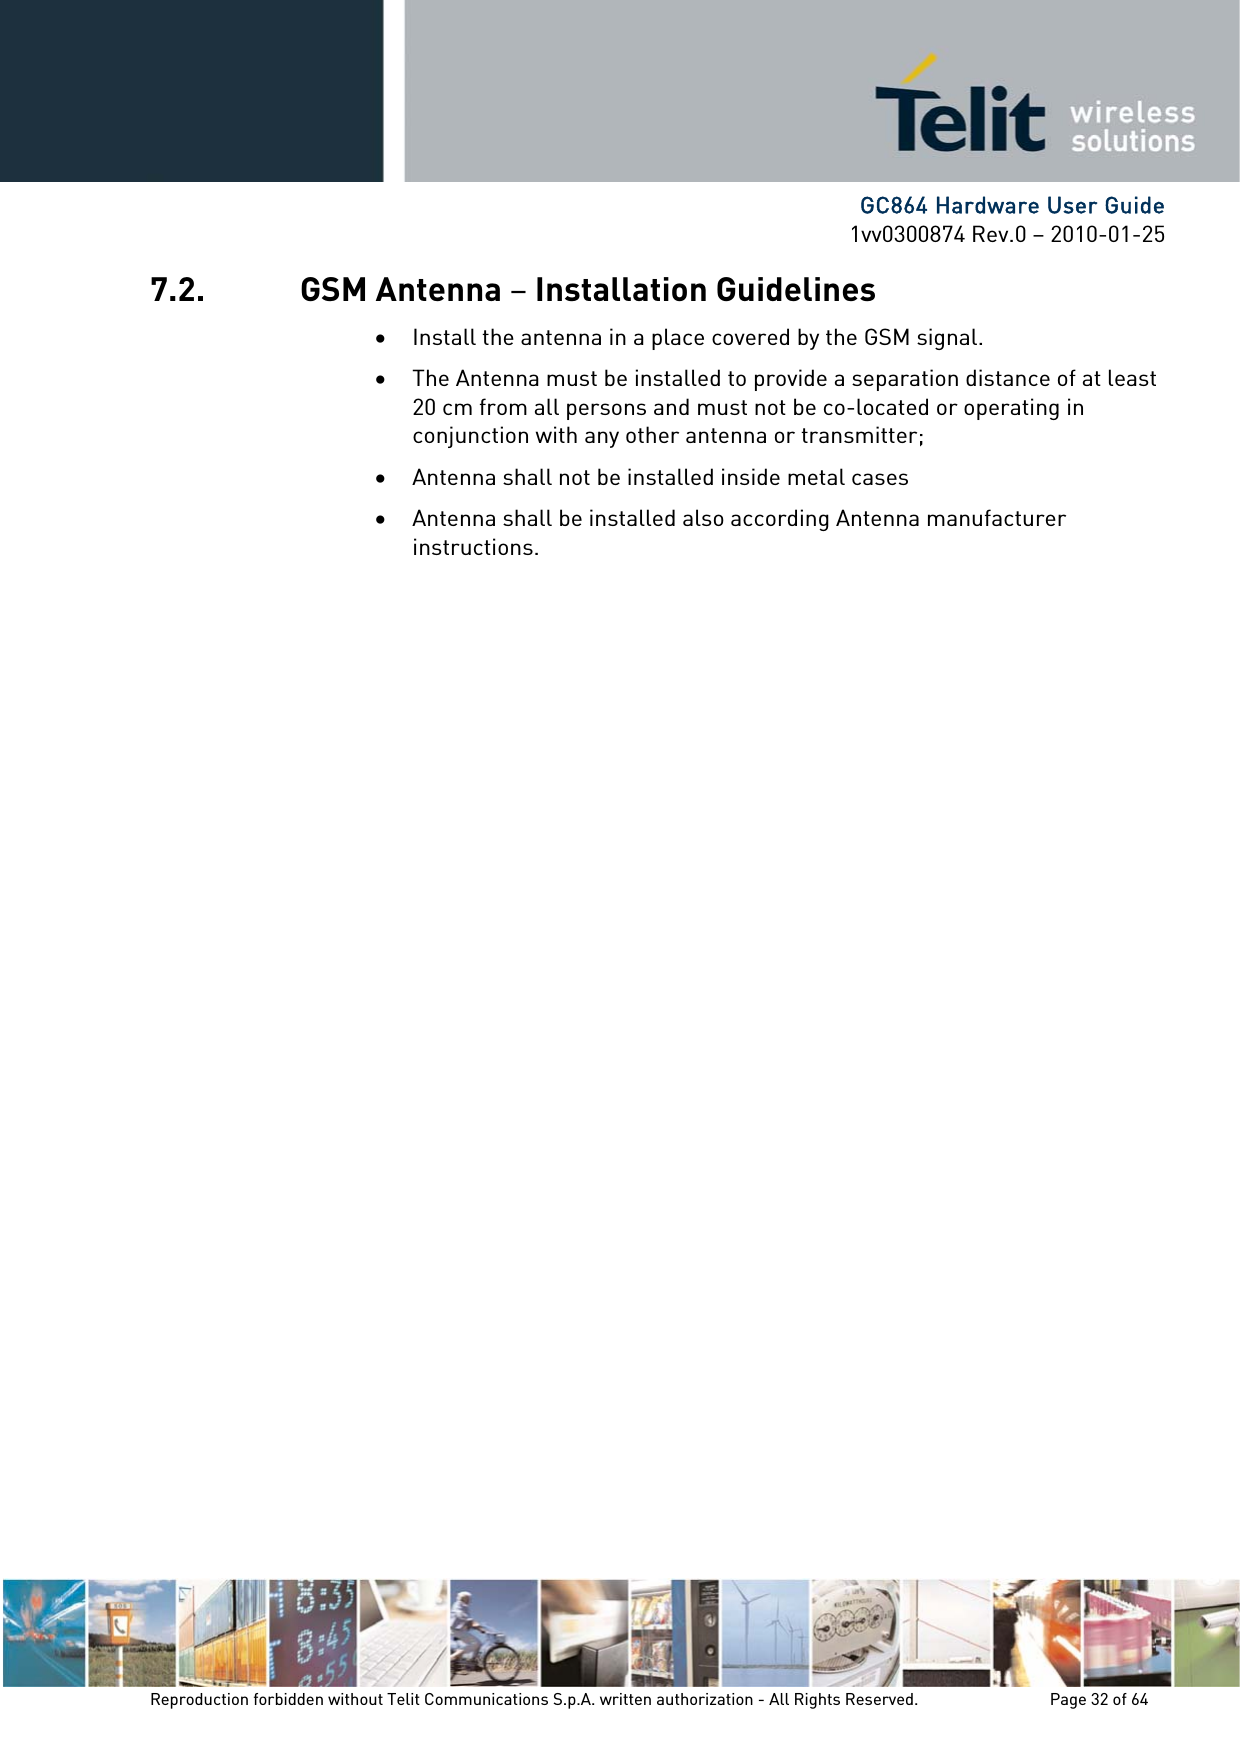      GC864 Hardware User Guide 1vv0300874 Rev.0 – 2010-01-25 Reproduction forbidden without Telit Communications S.p.A. written authorization - All Rights Reserved.    Page 32 of 64  7.2. GSM Antenna – Installation Guidelines • Install the antenna in a place covered by the GSM signal. • The Antenna must be installed to provide a separation distance of at least 20 cm from all persons and must not be co-located or operating in conjunction with any other antenna or transmitter; • Antenna shall not be installed inside metal cases  • Antenna shall be installed also according Antenna manufacturer instructions. 